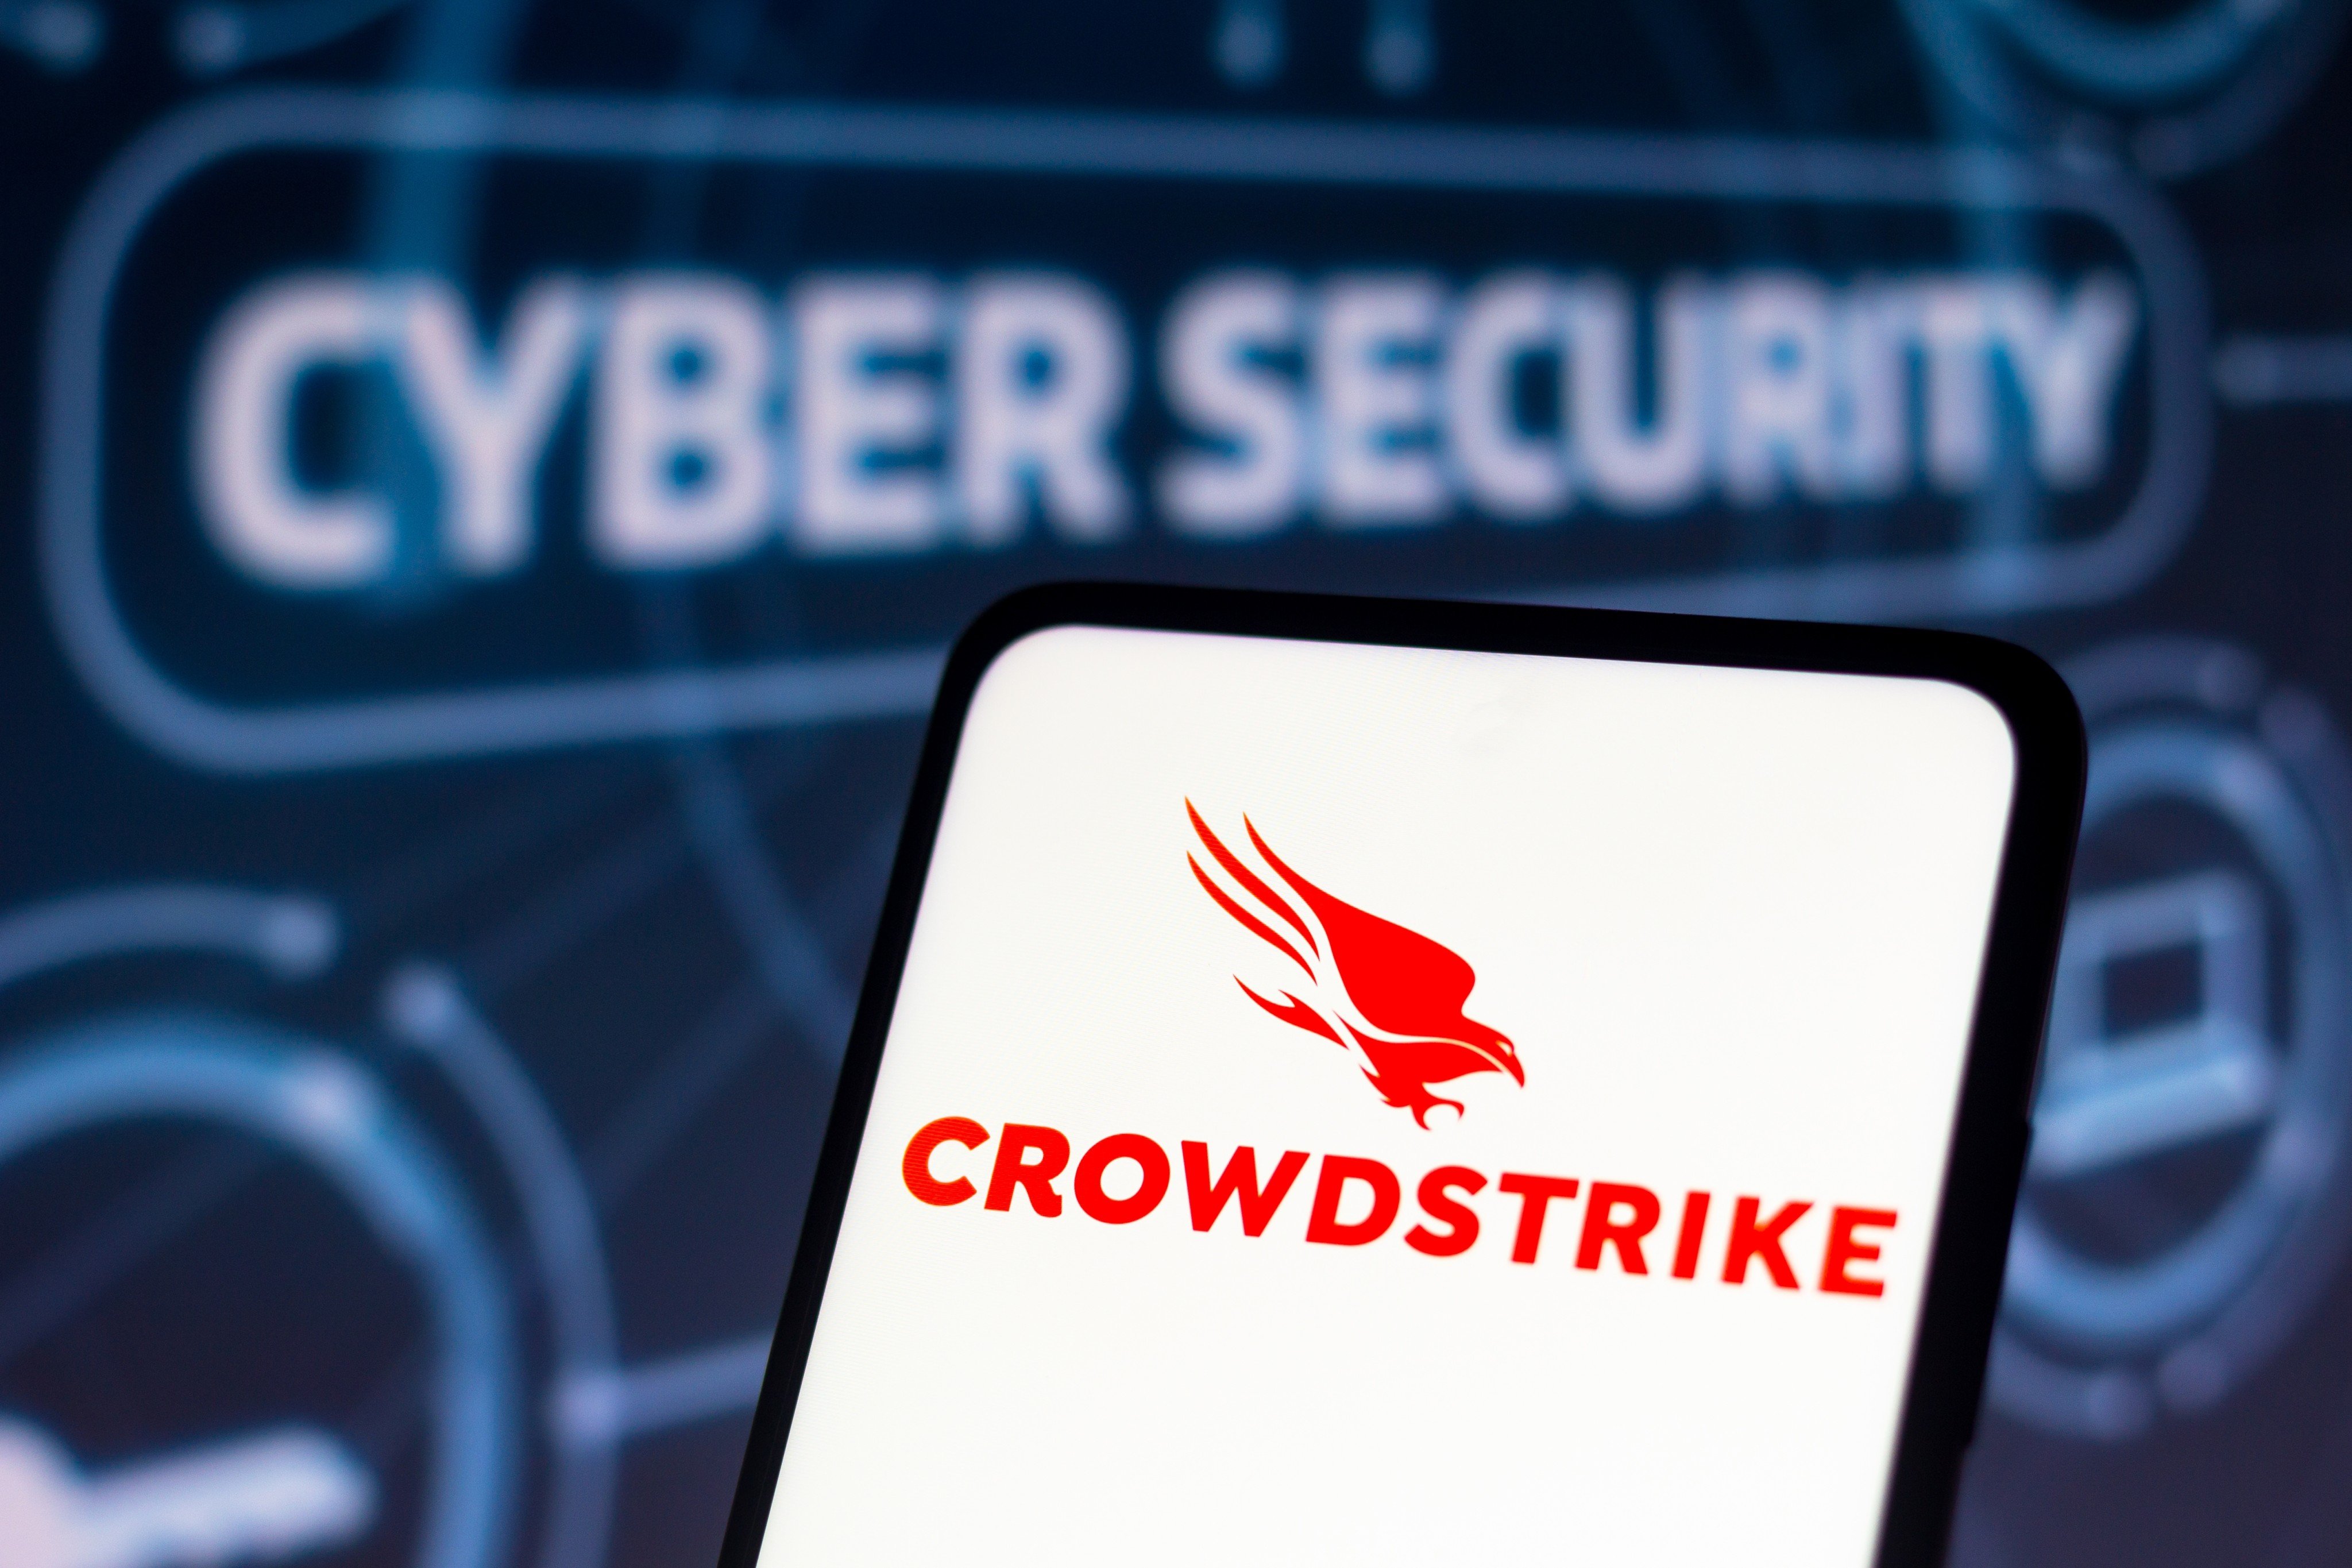 CrowdStrike said a bug in a quality-assurance tool it uses to check updates for mistakes allowed flawed data out to customers, causing last week’s meltdown. Photo: Shutterstock